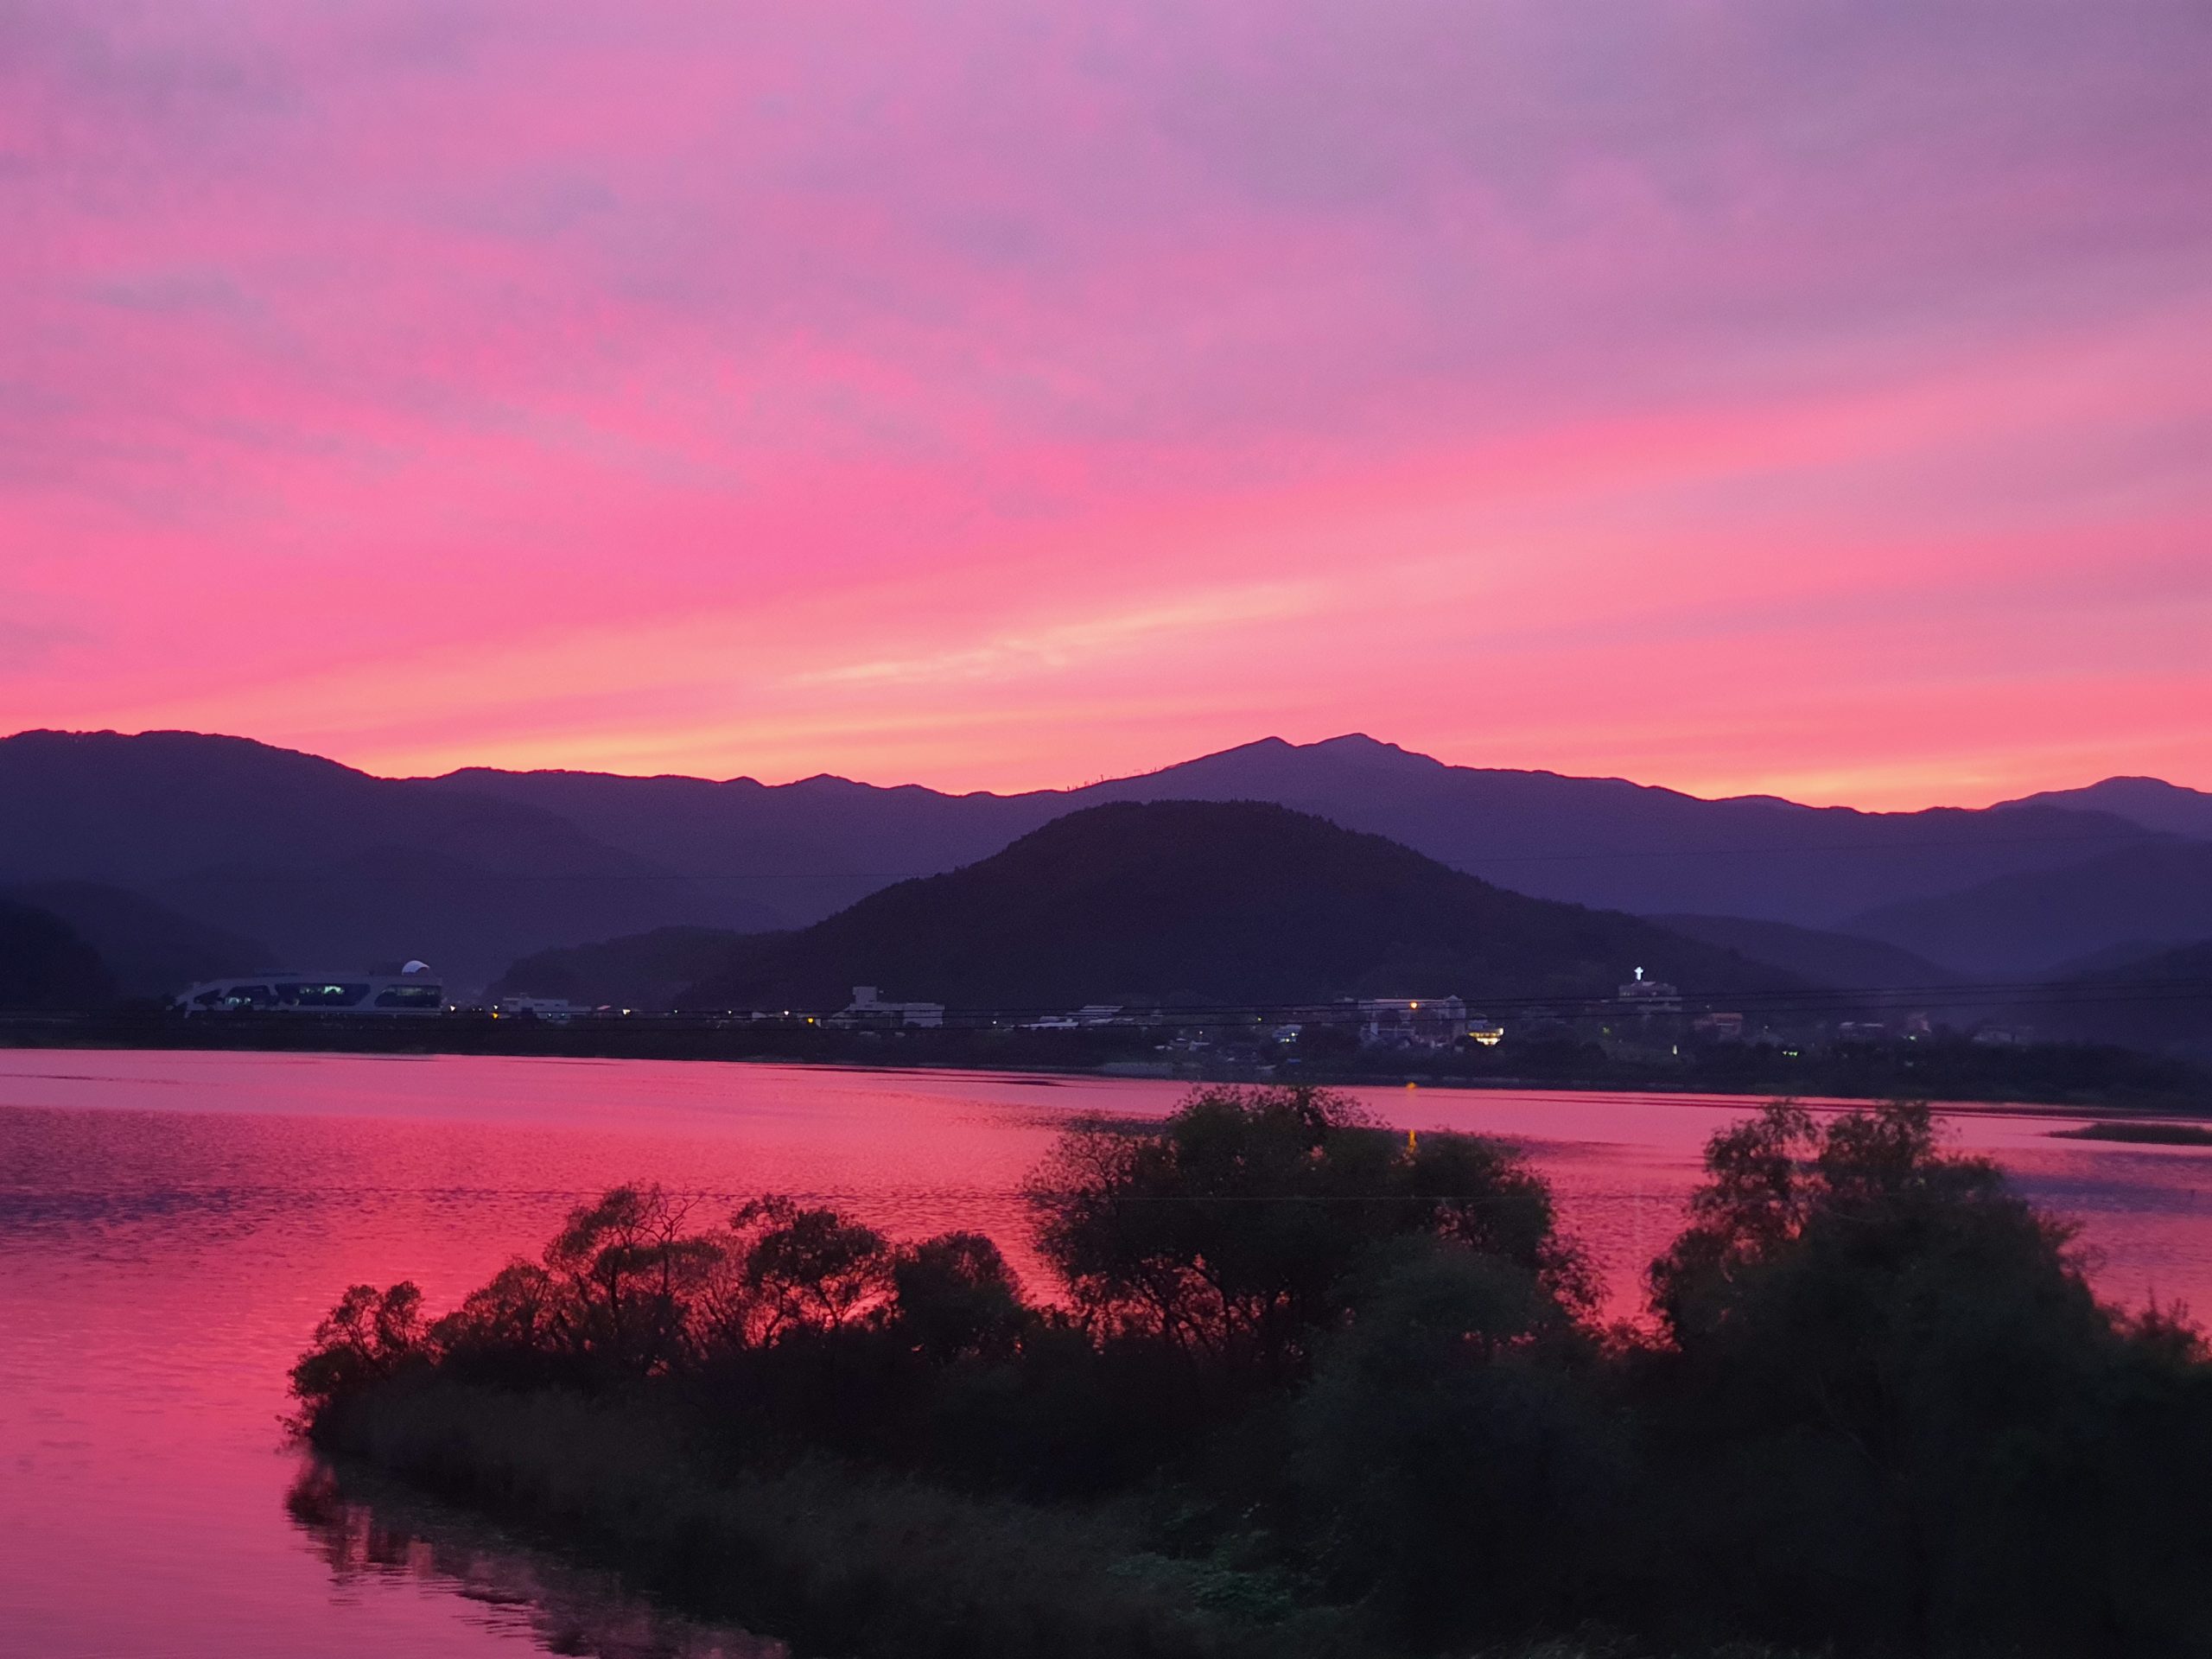 Bright pink sunset over mountains, reflected on lake